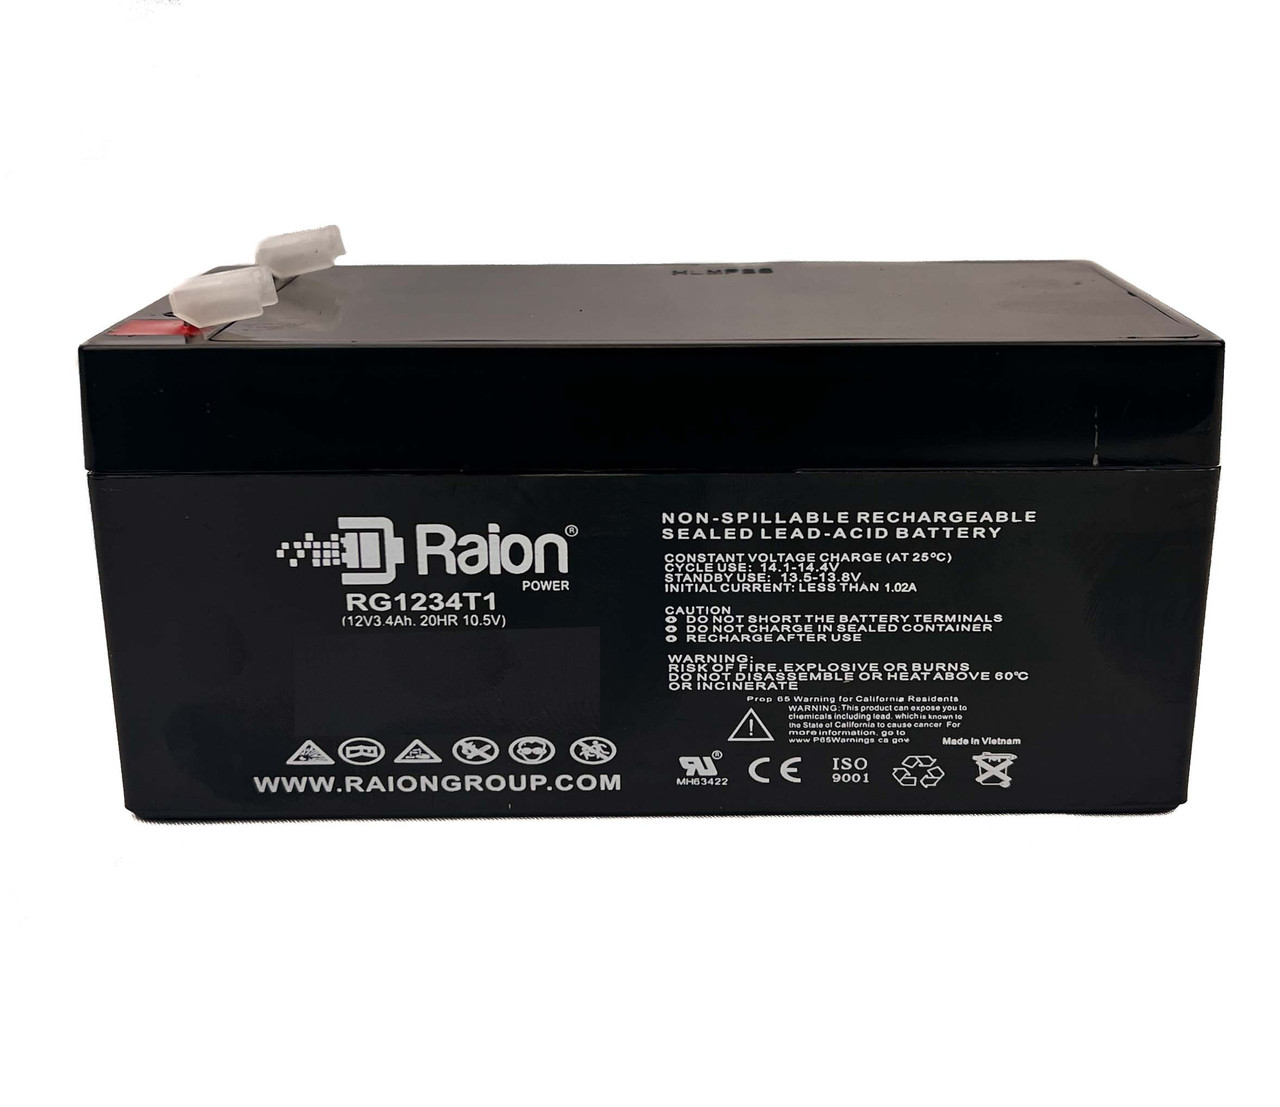 Raion Power RG1234T1 Rechargeable Compatible Rechargeable Battery for IBT BT3.4-12